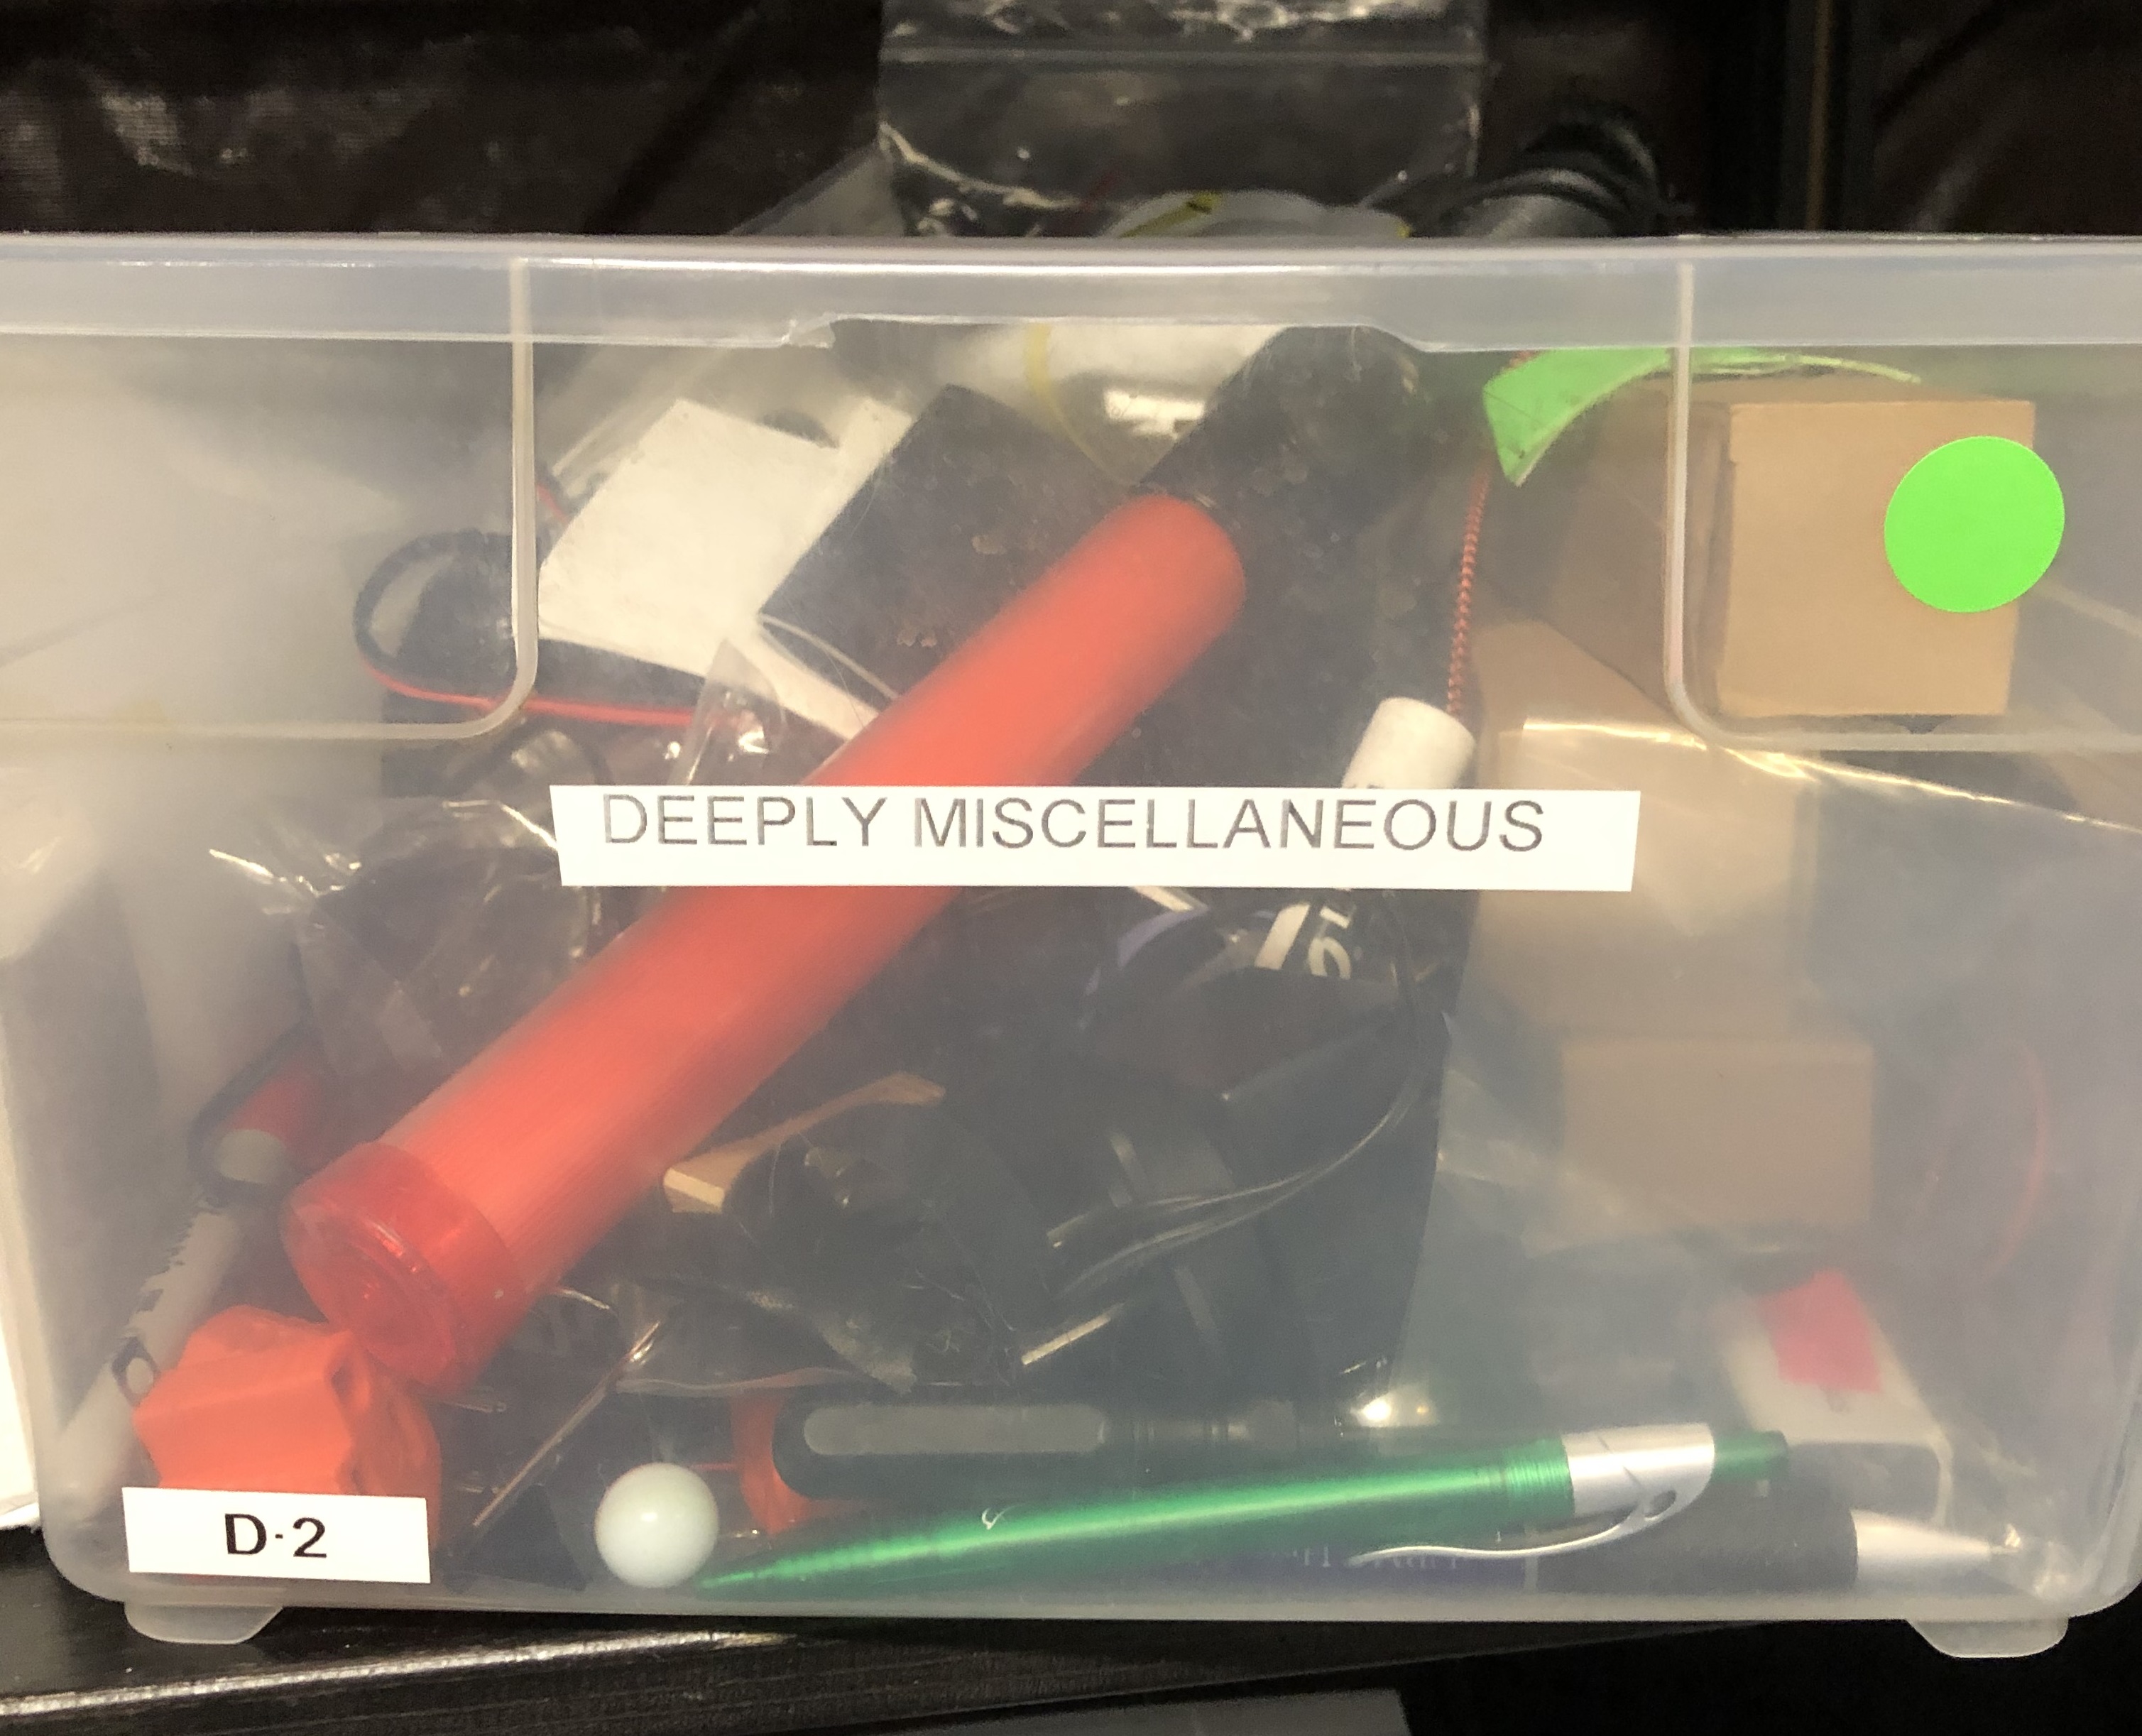 Bin in the IDeATe Media Lab labeled "deeply miscellaneous"